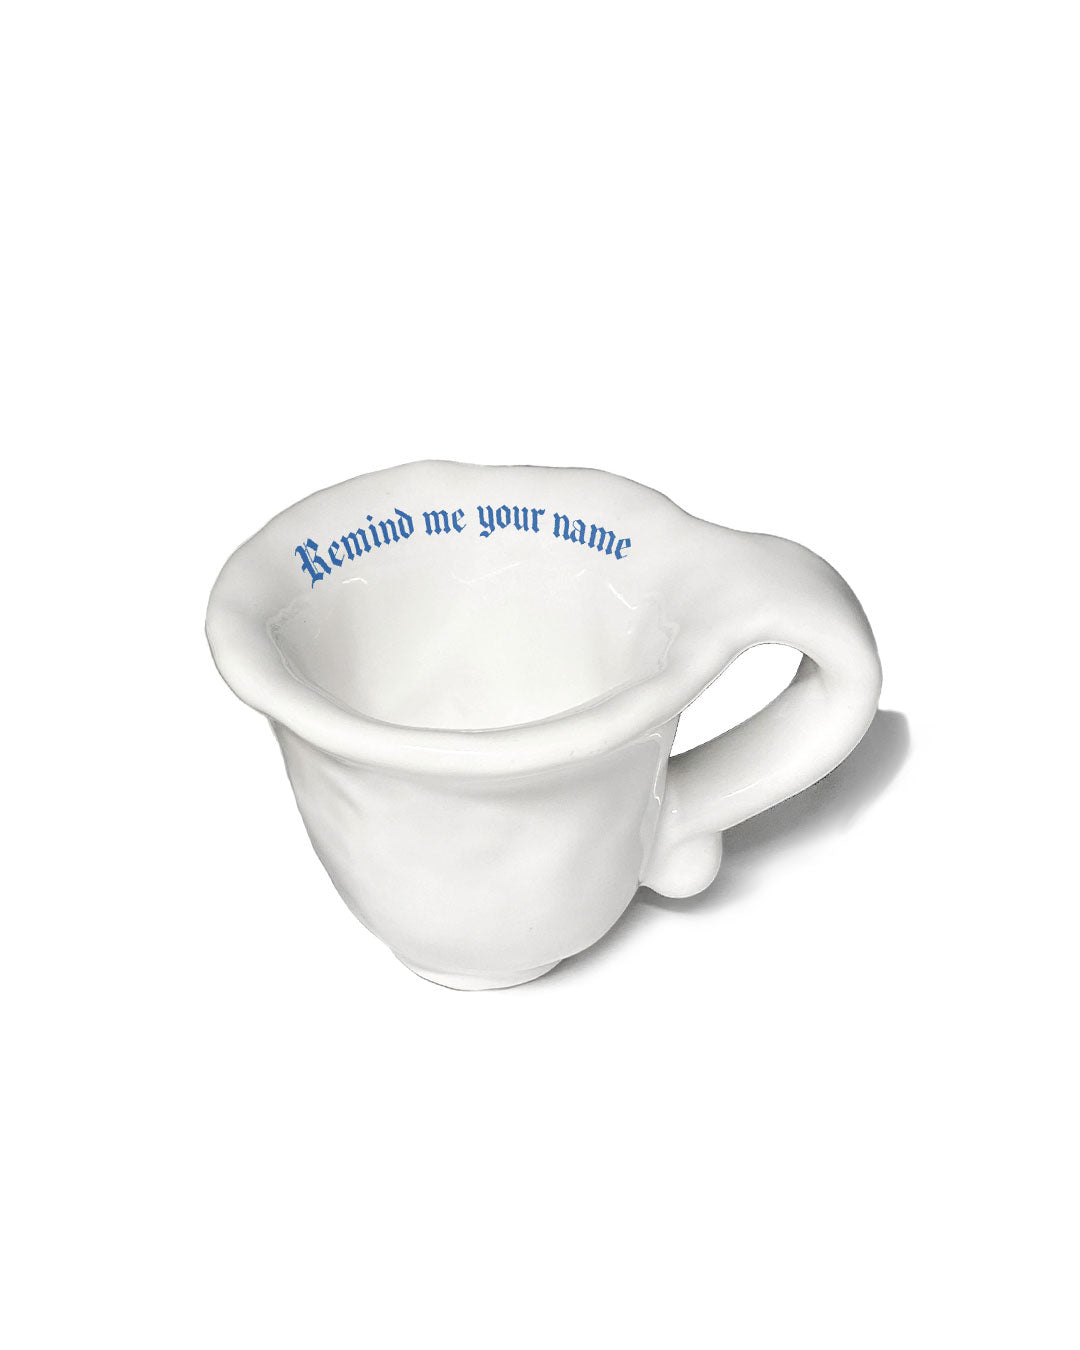 Remind me your name Sassy Espresso Cup